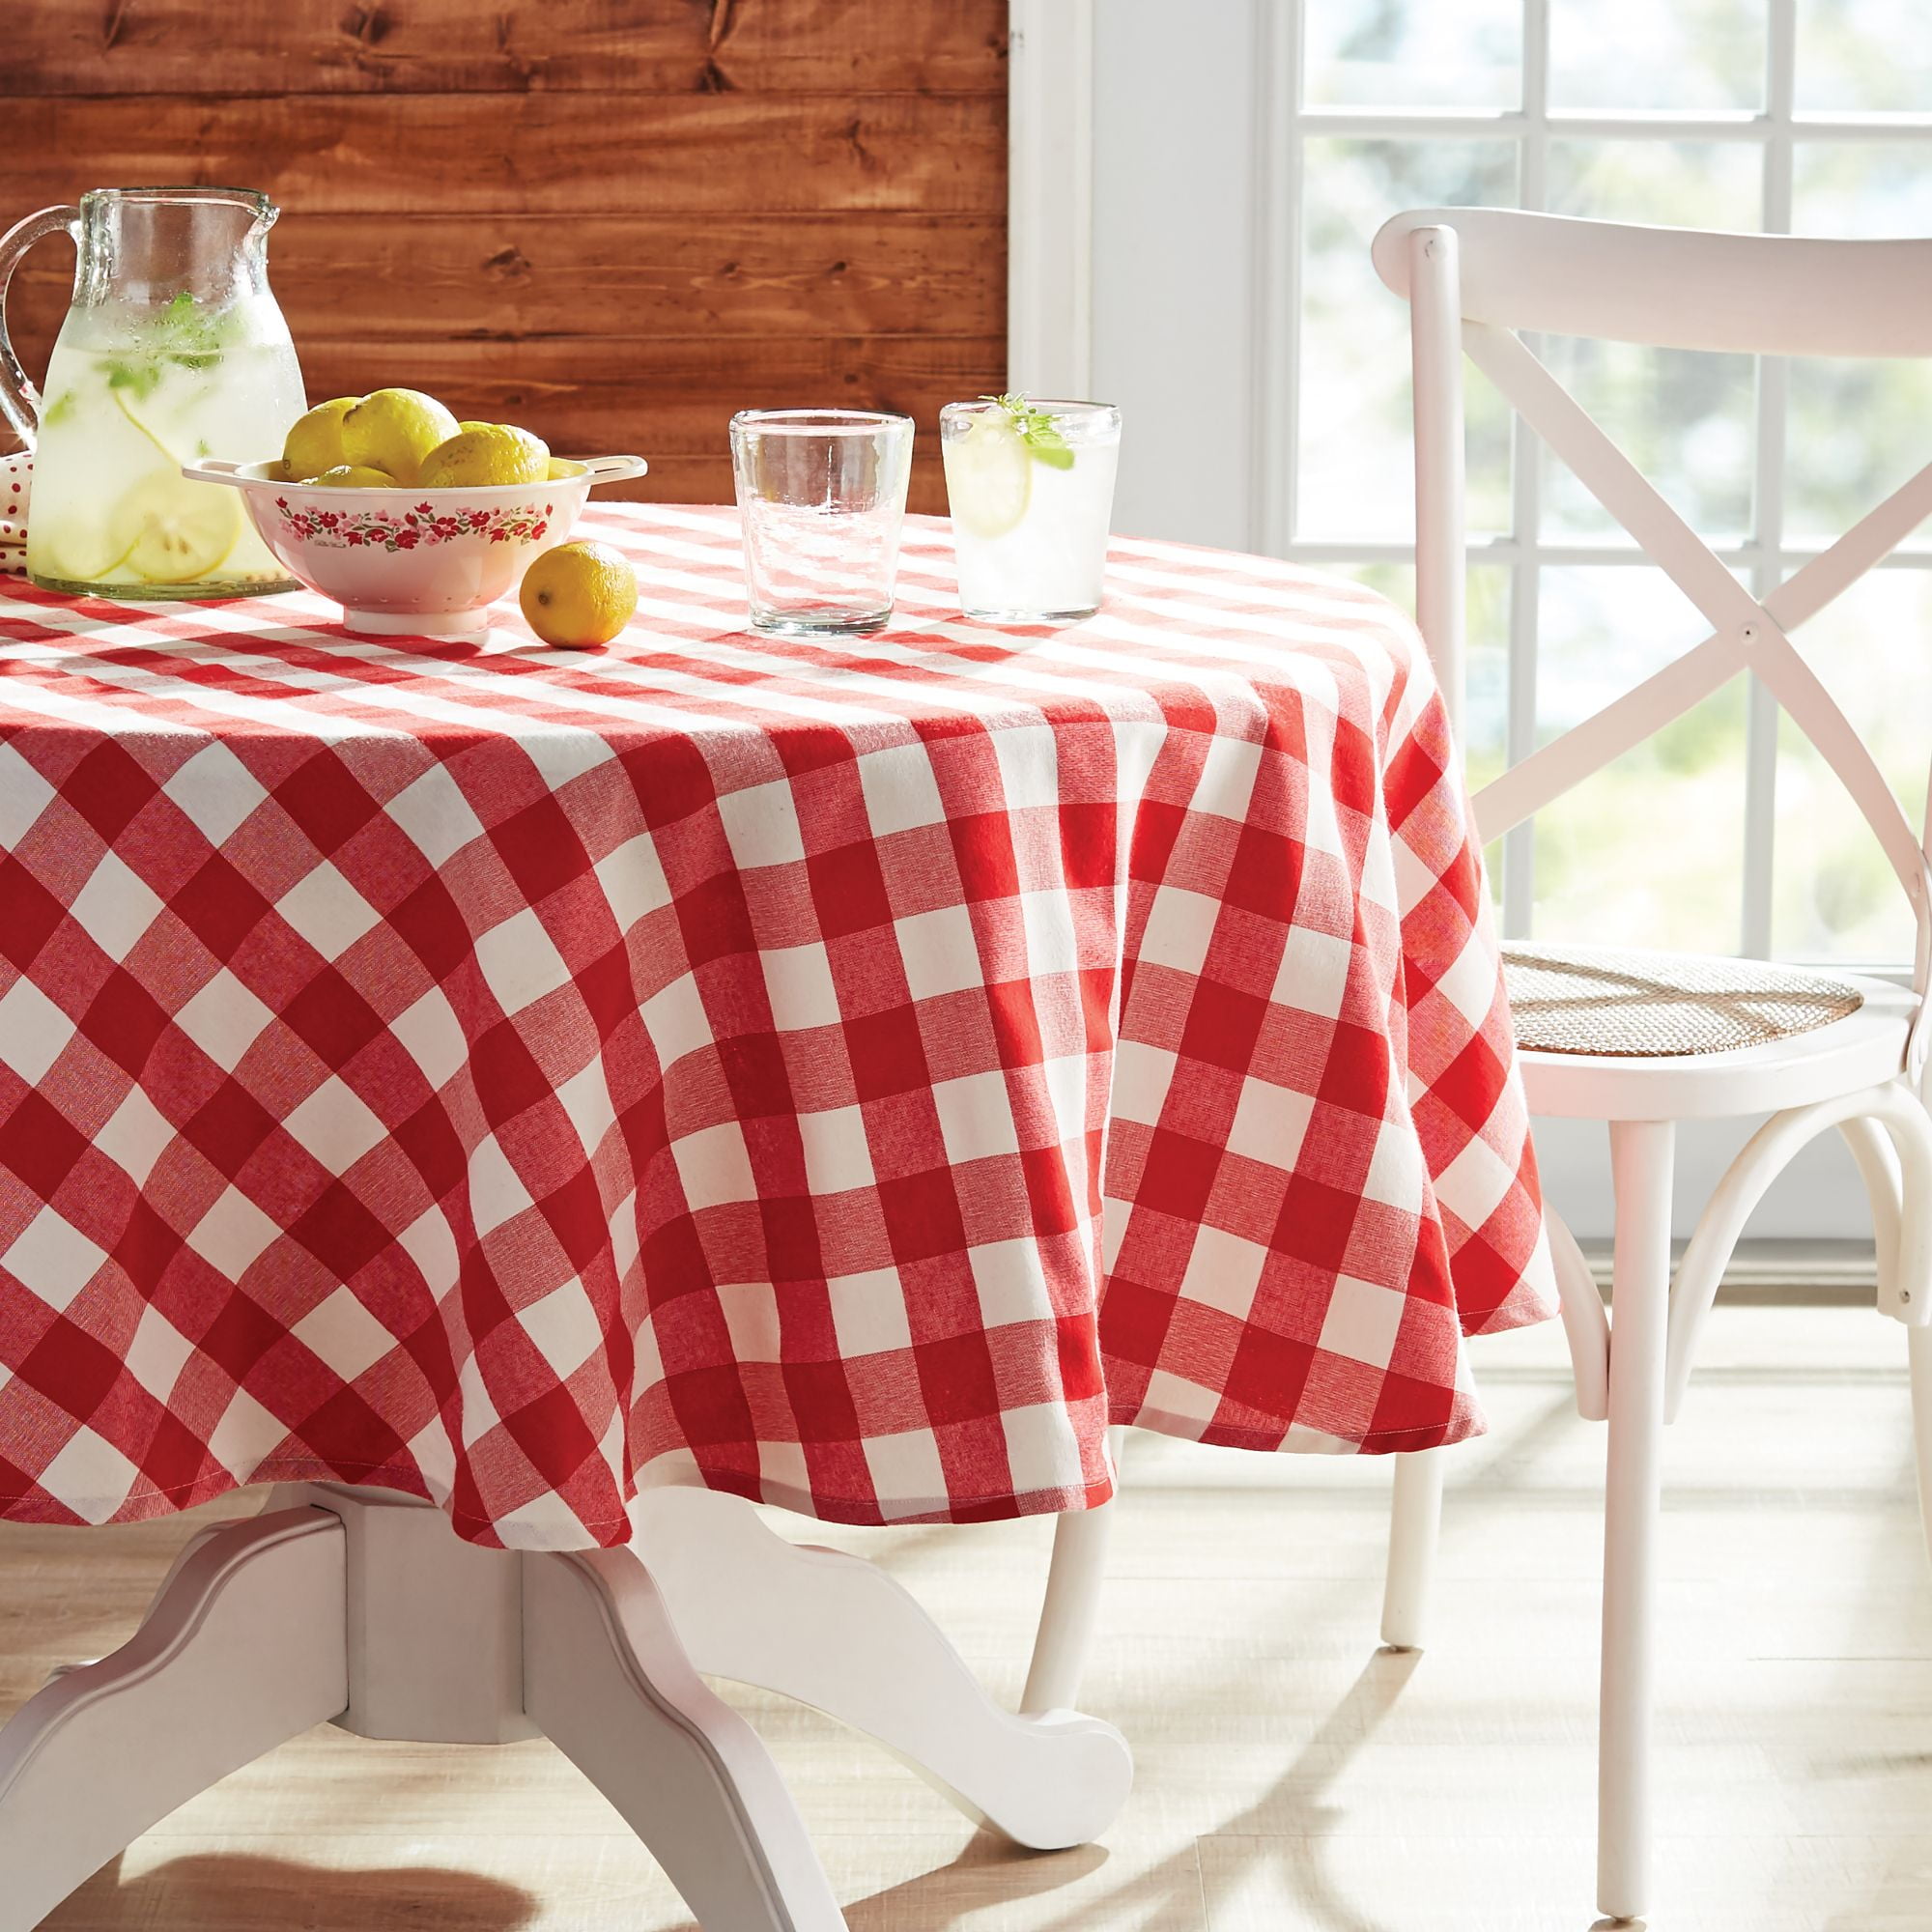 Pioneer Woman Charming Check Tablecloth, How Many Chairs Fit Around A 66 Inch Round Tablecloth